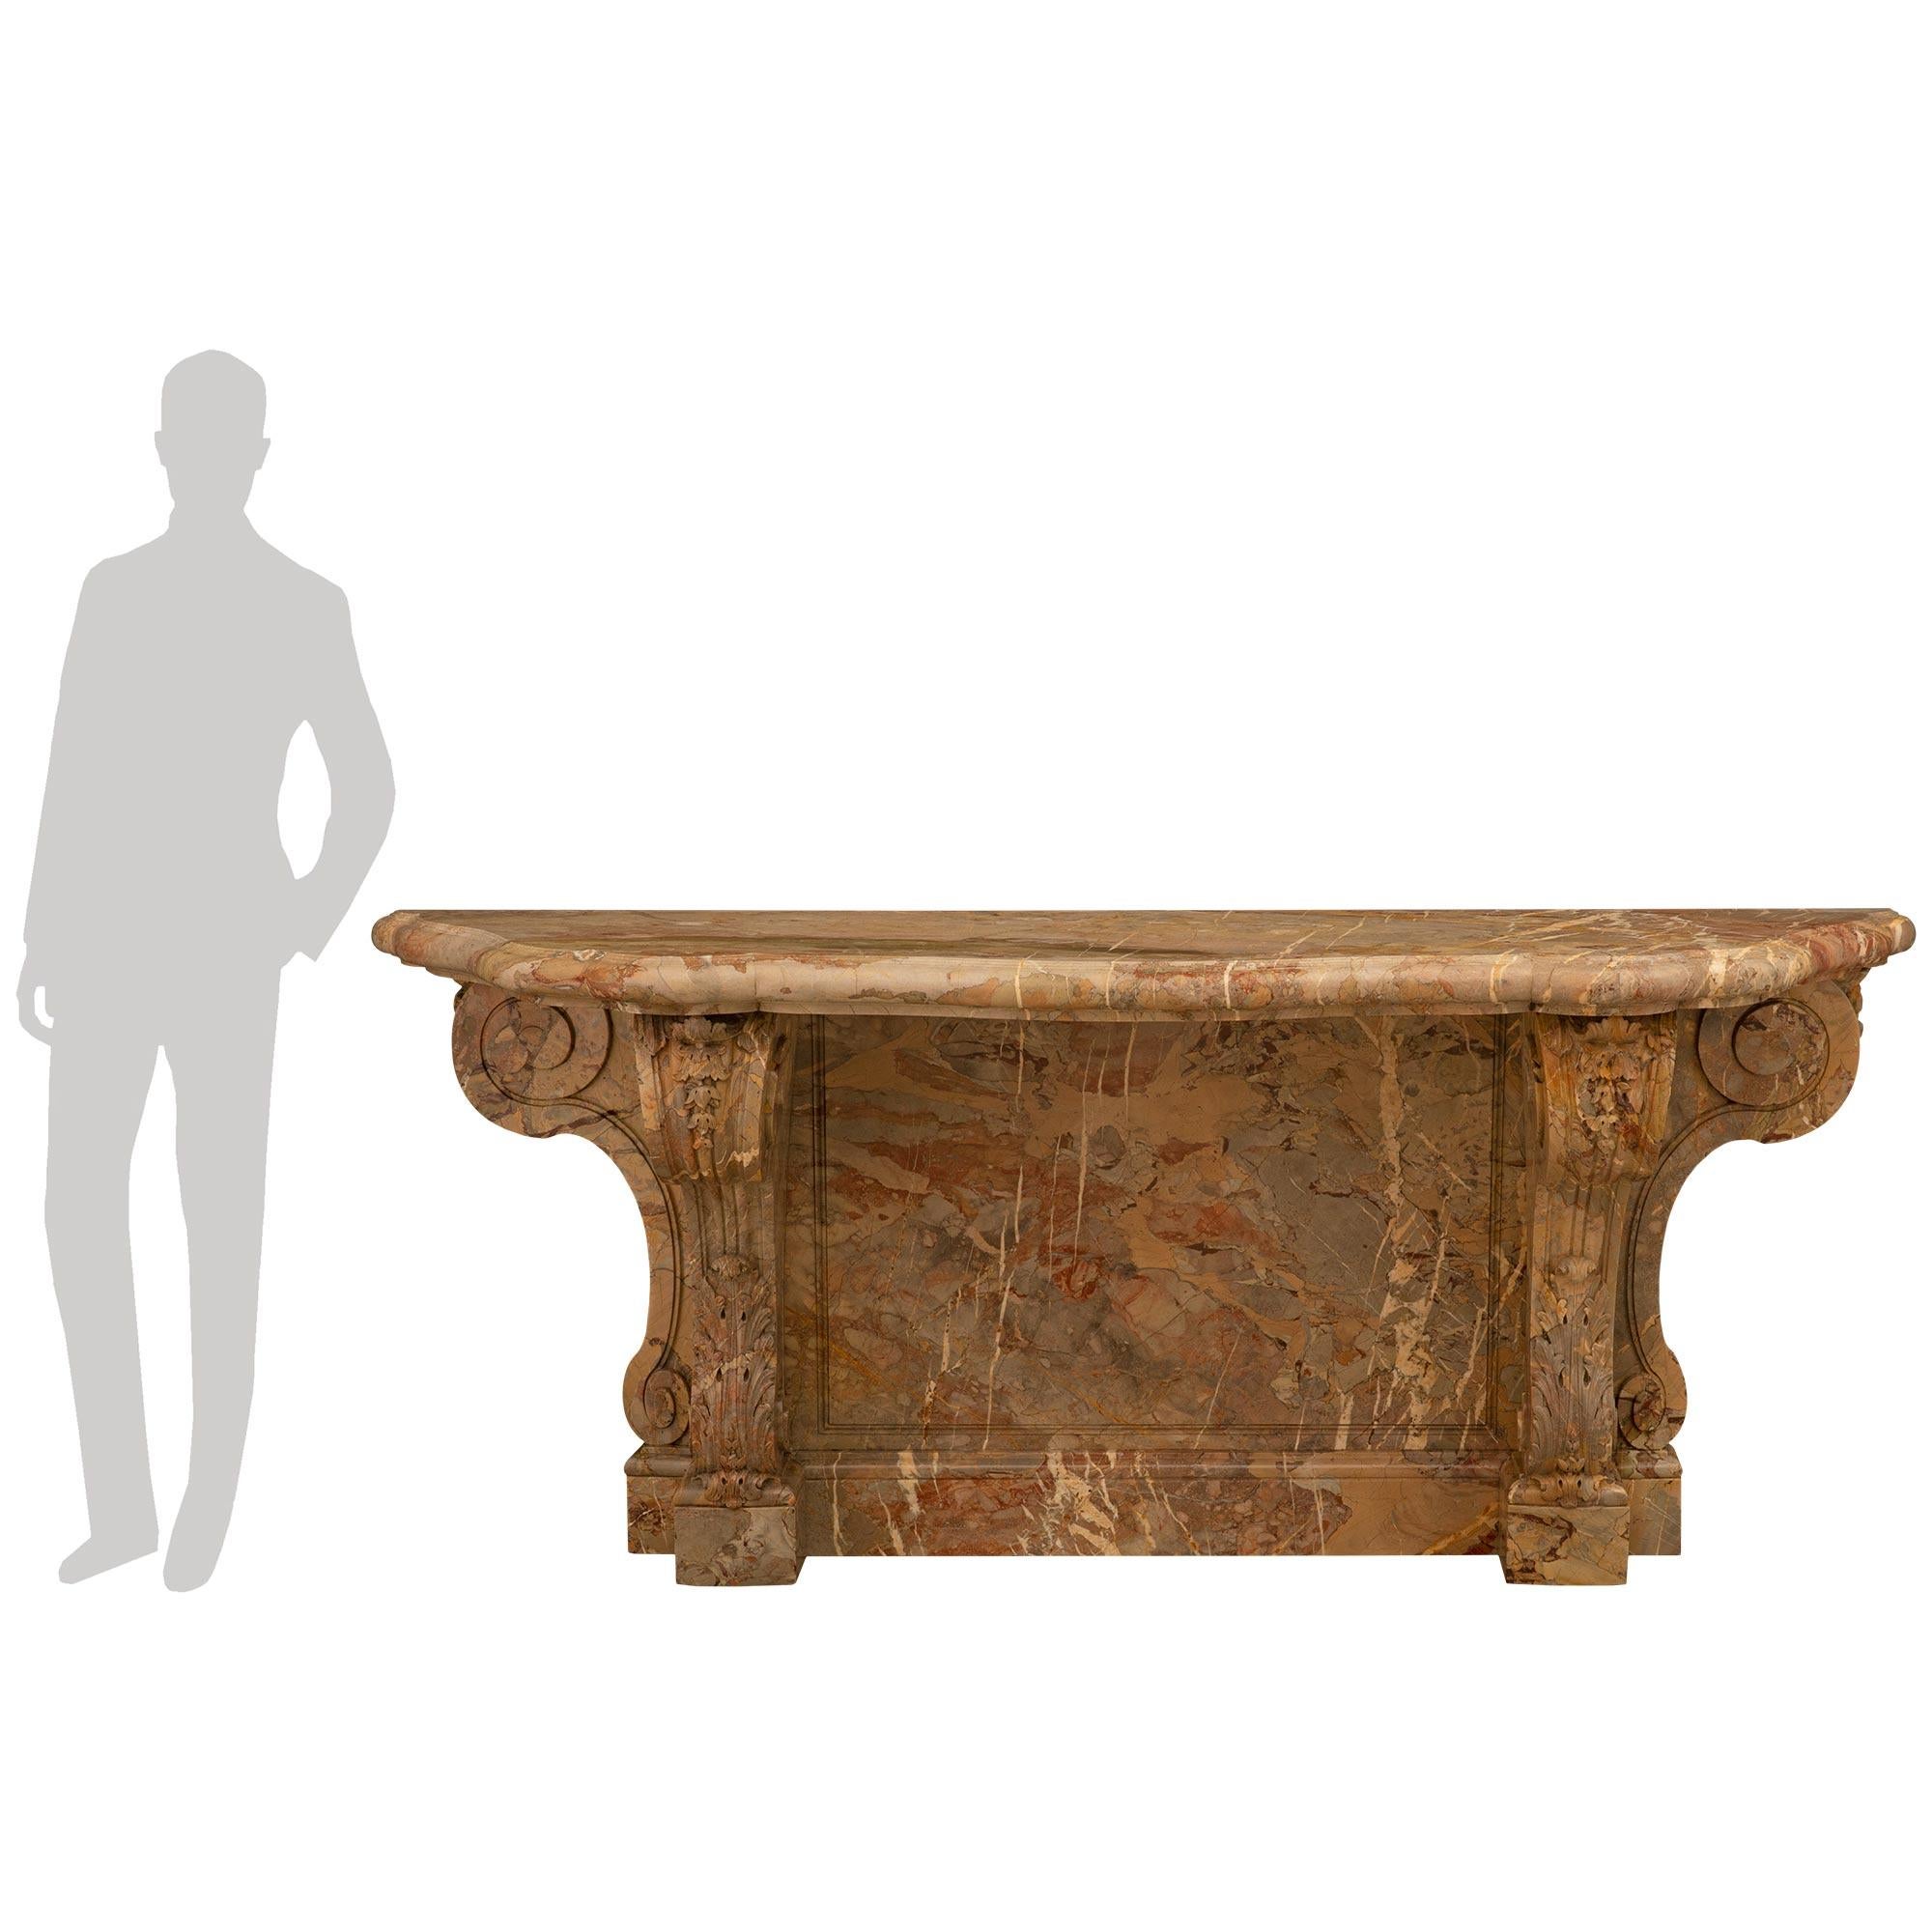 





A most impressive and large scaled French 19th century Louis XVI st. Sarrancolin marble console. The console is raised by two 'S' scrolled legs with richly carved bottom acanthus leaves and top carved foliage. The two supporting legs flank a